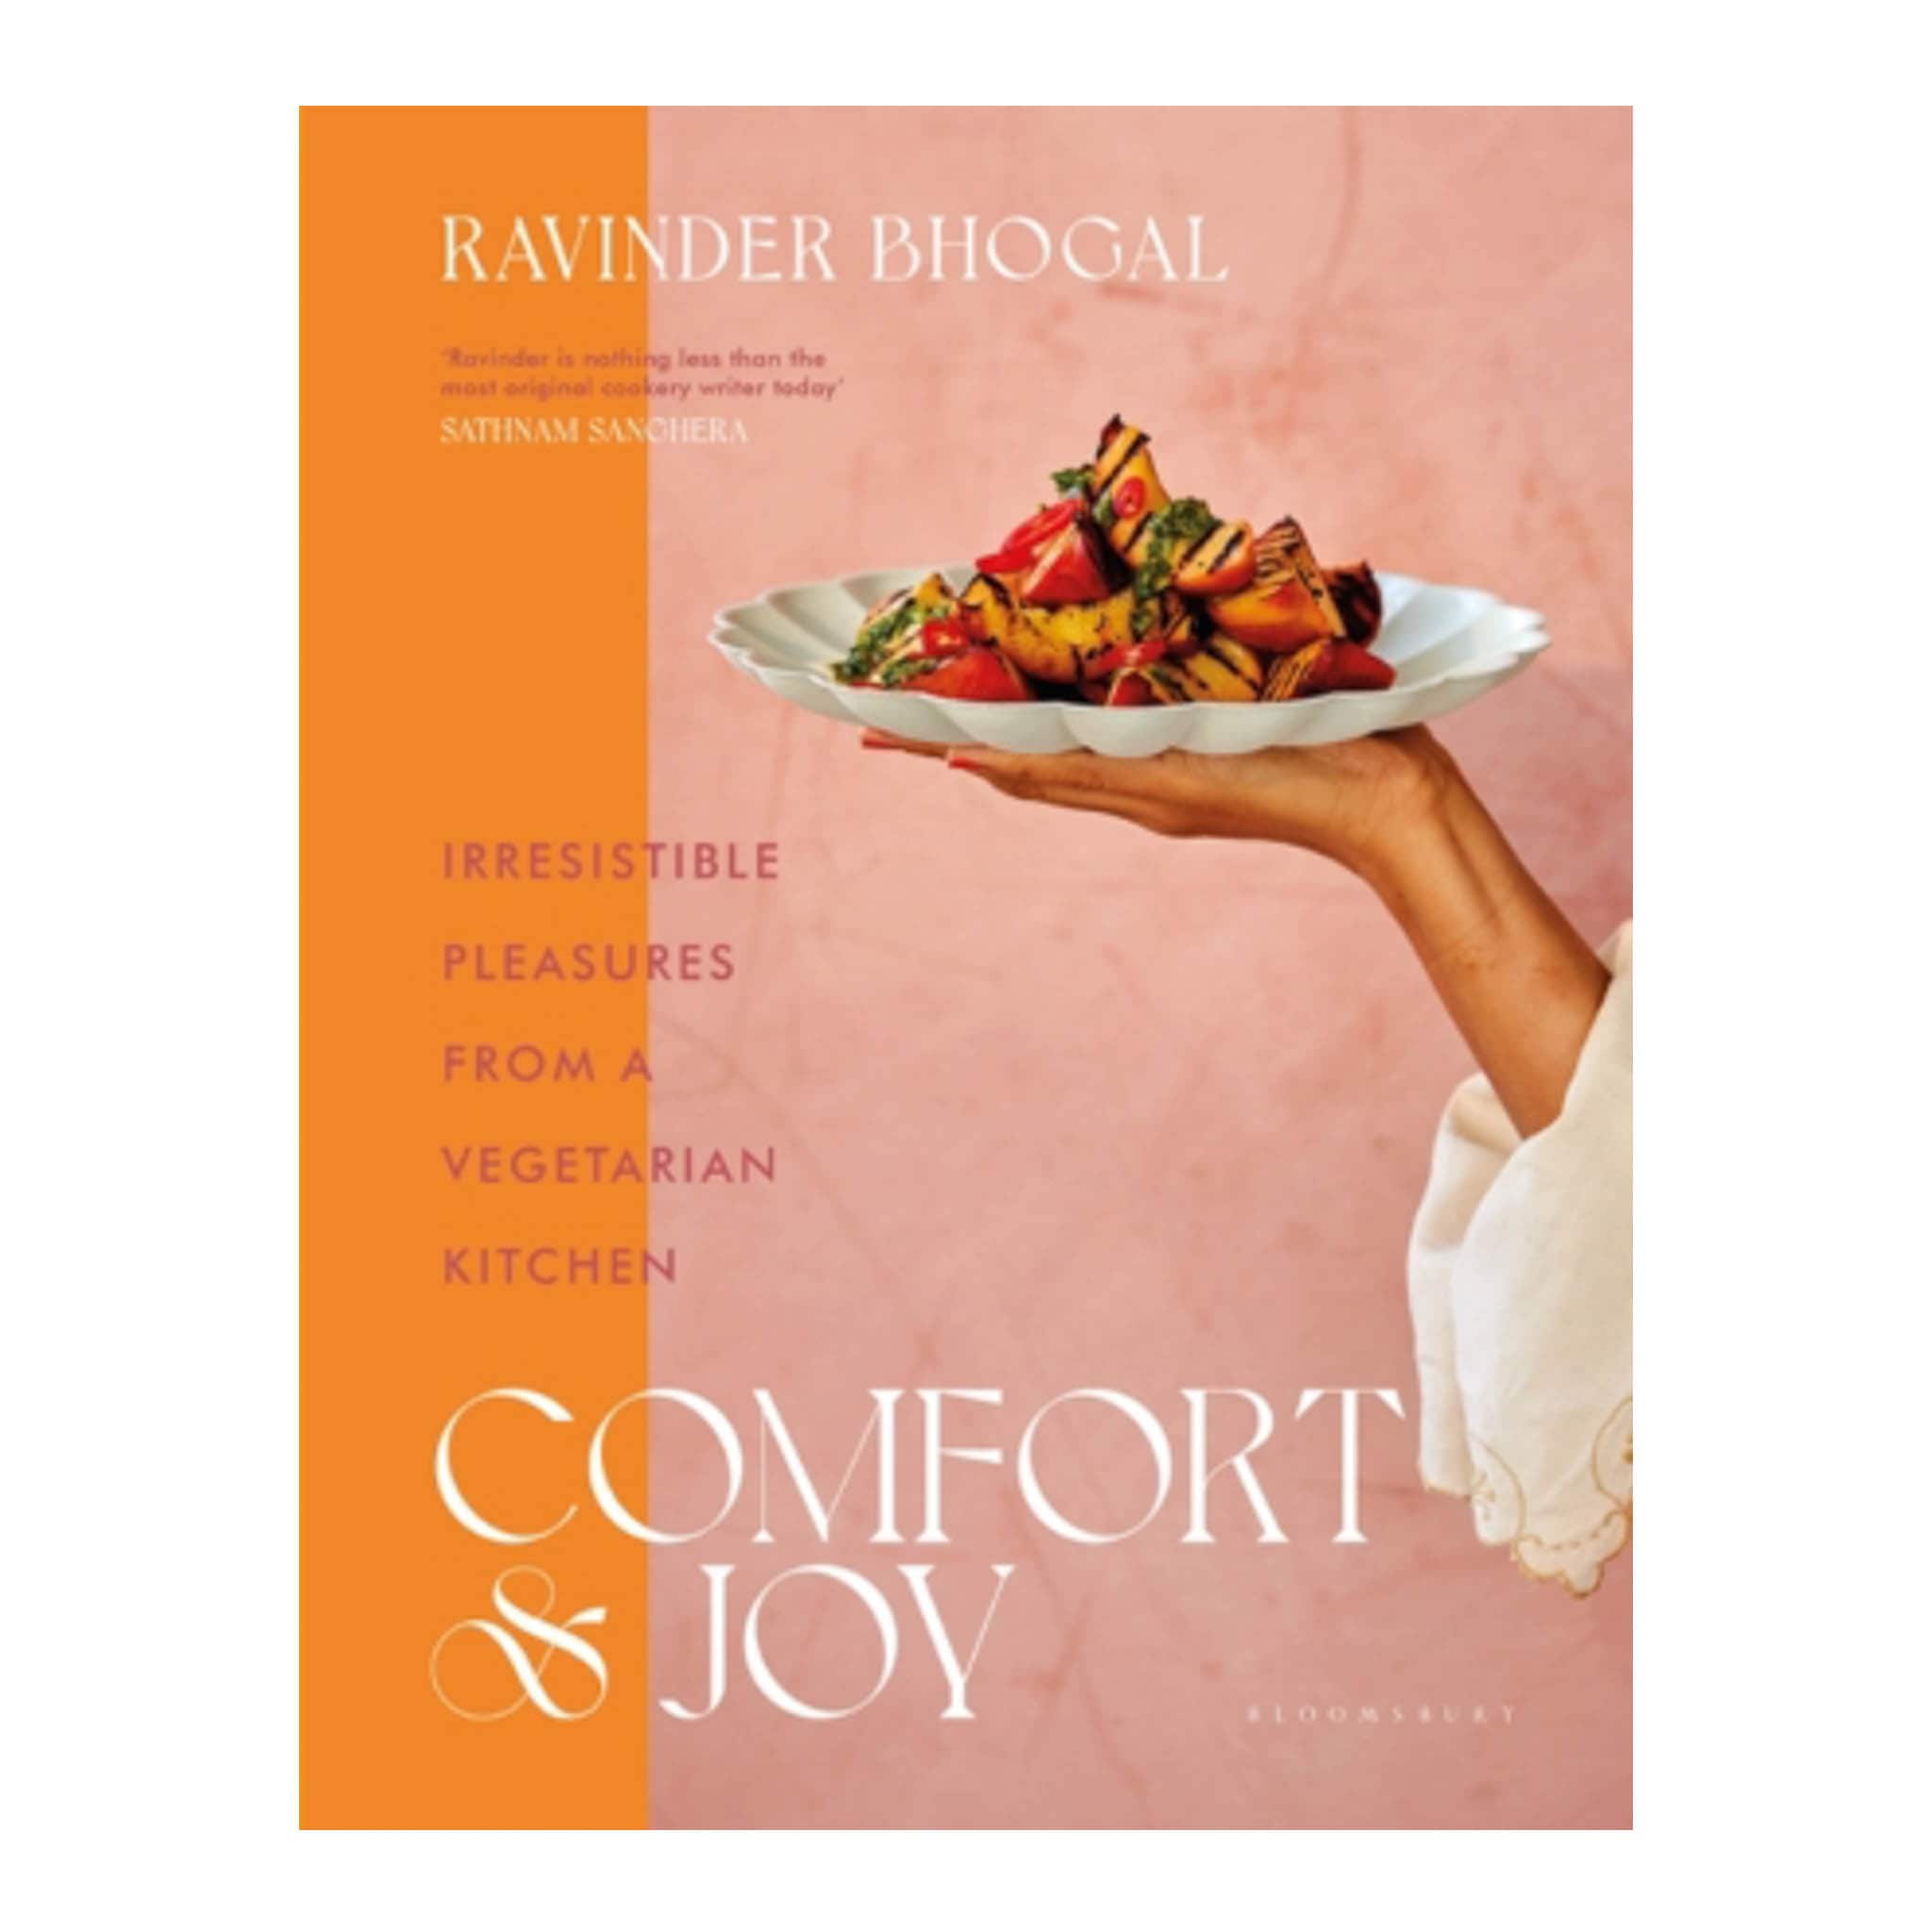 Comfort and Joy: Irresistible Pleasures from a Vegetarian Kitchen, by Ravinder Bhogal